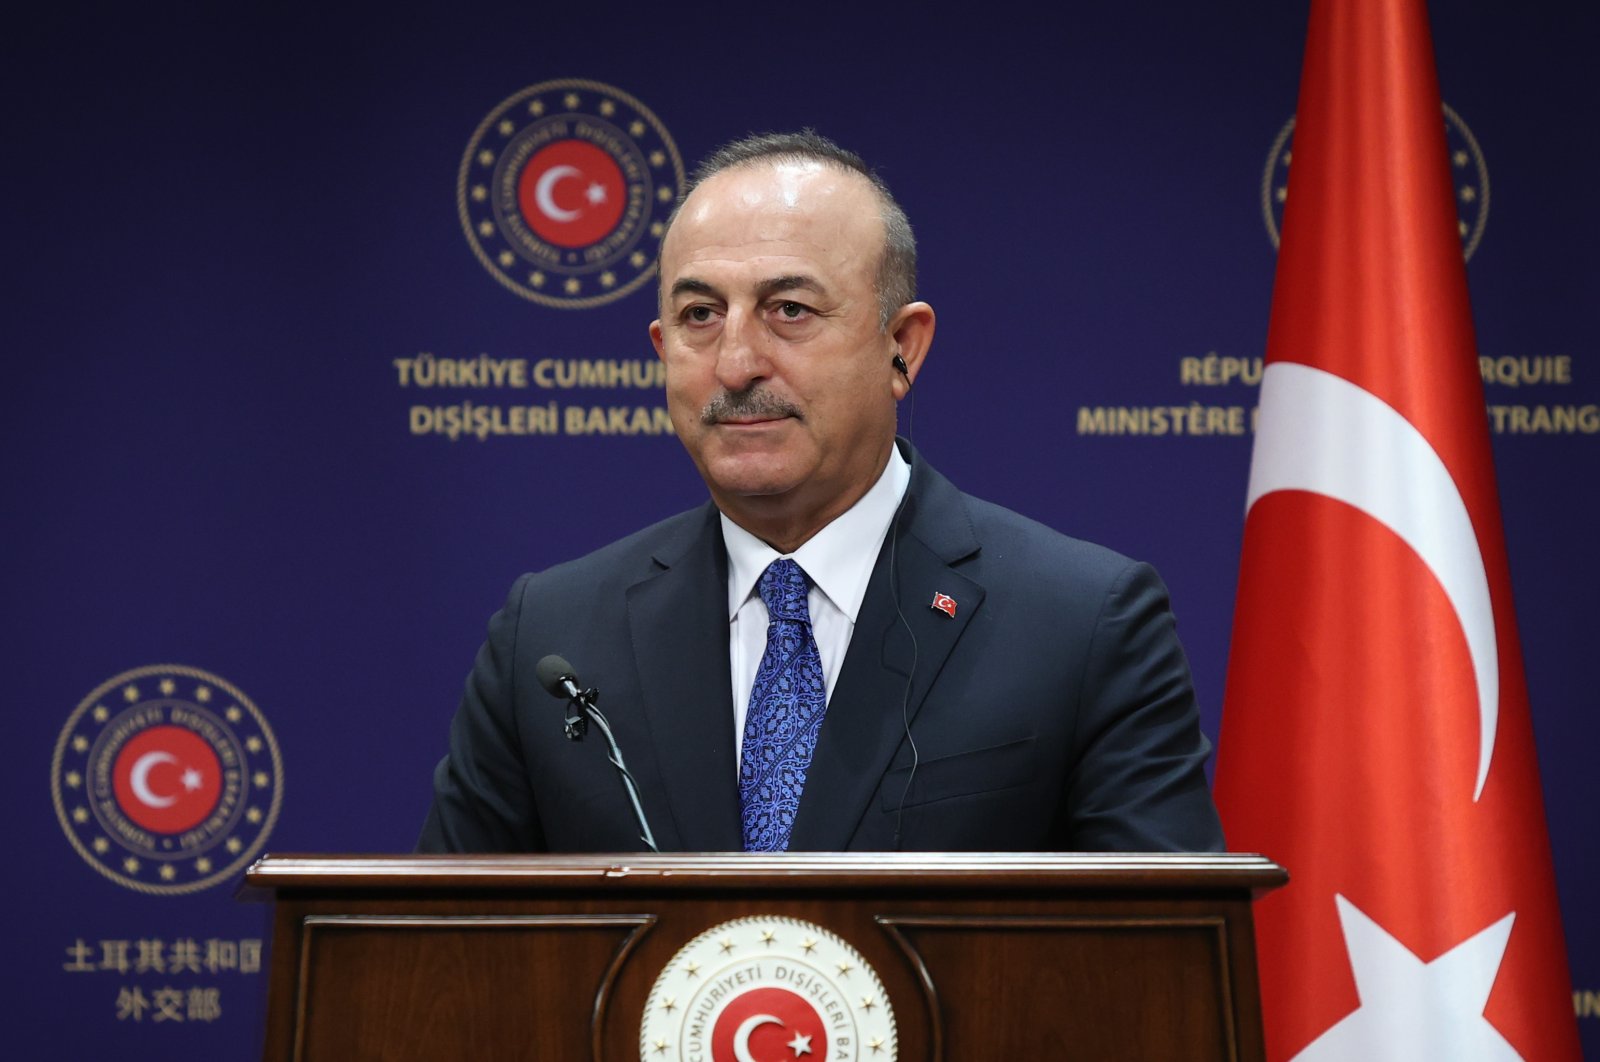 Foreign Minister Mevlüt Çavuşoğlu speaks at a joint news conference with African Union Commission head Moussa Faki Mahamat in the capital Ankara, Turkey, Sept. 30, 2021. (AA Photo)